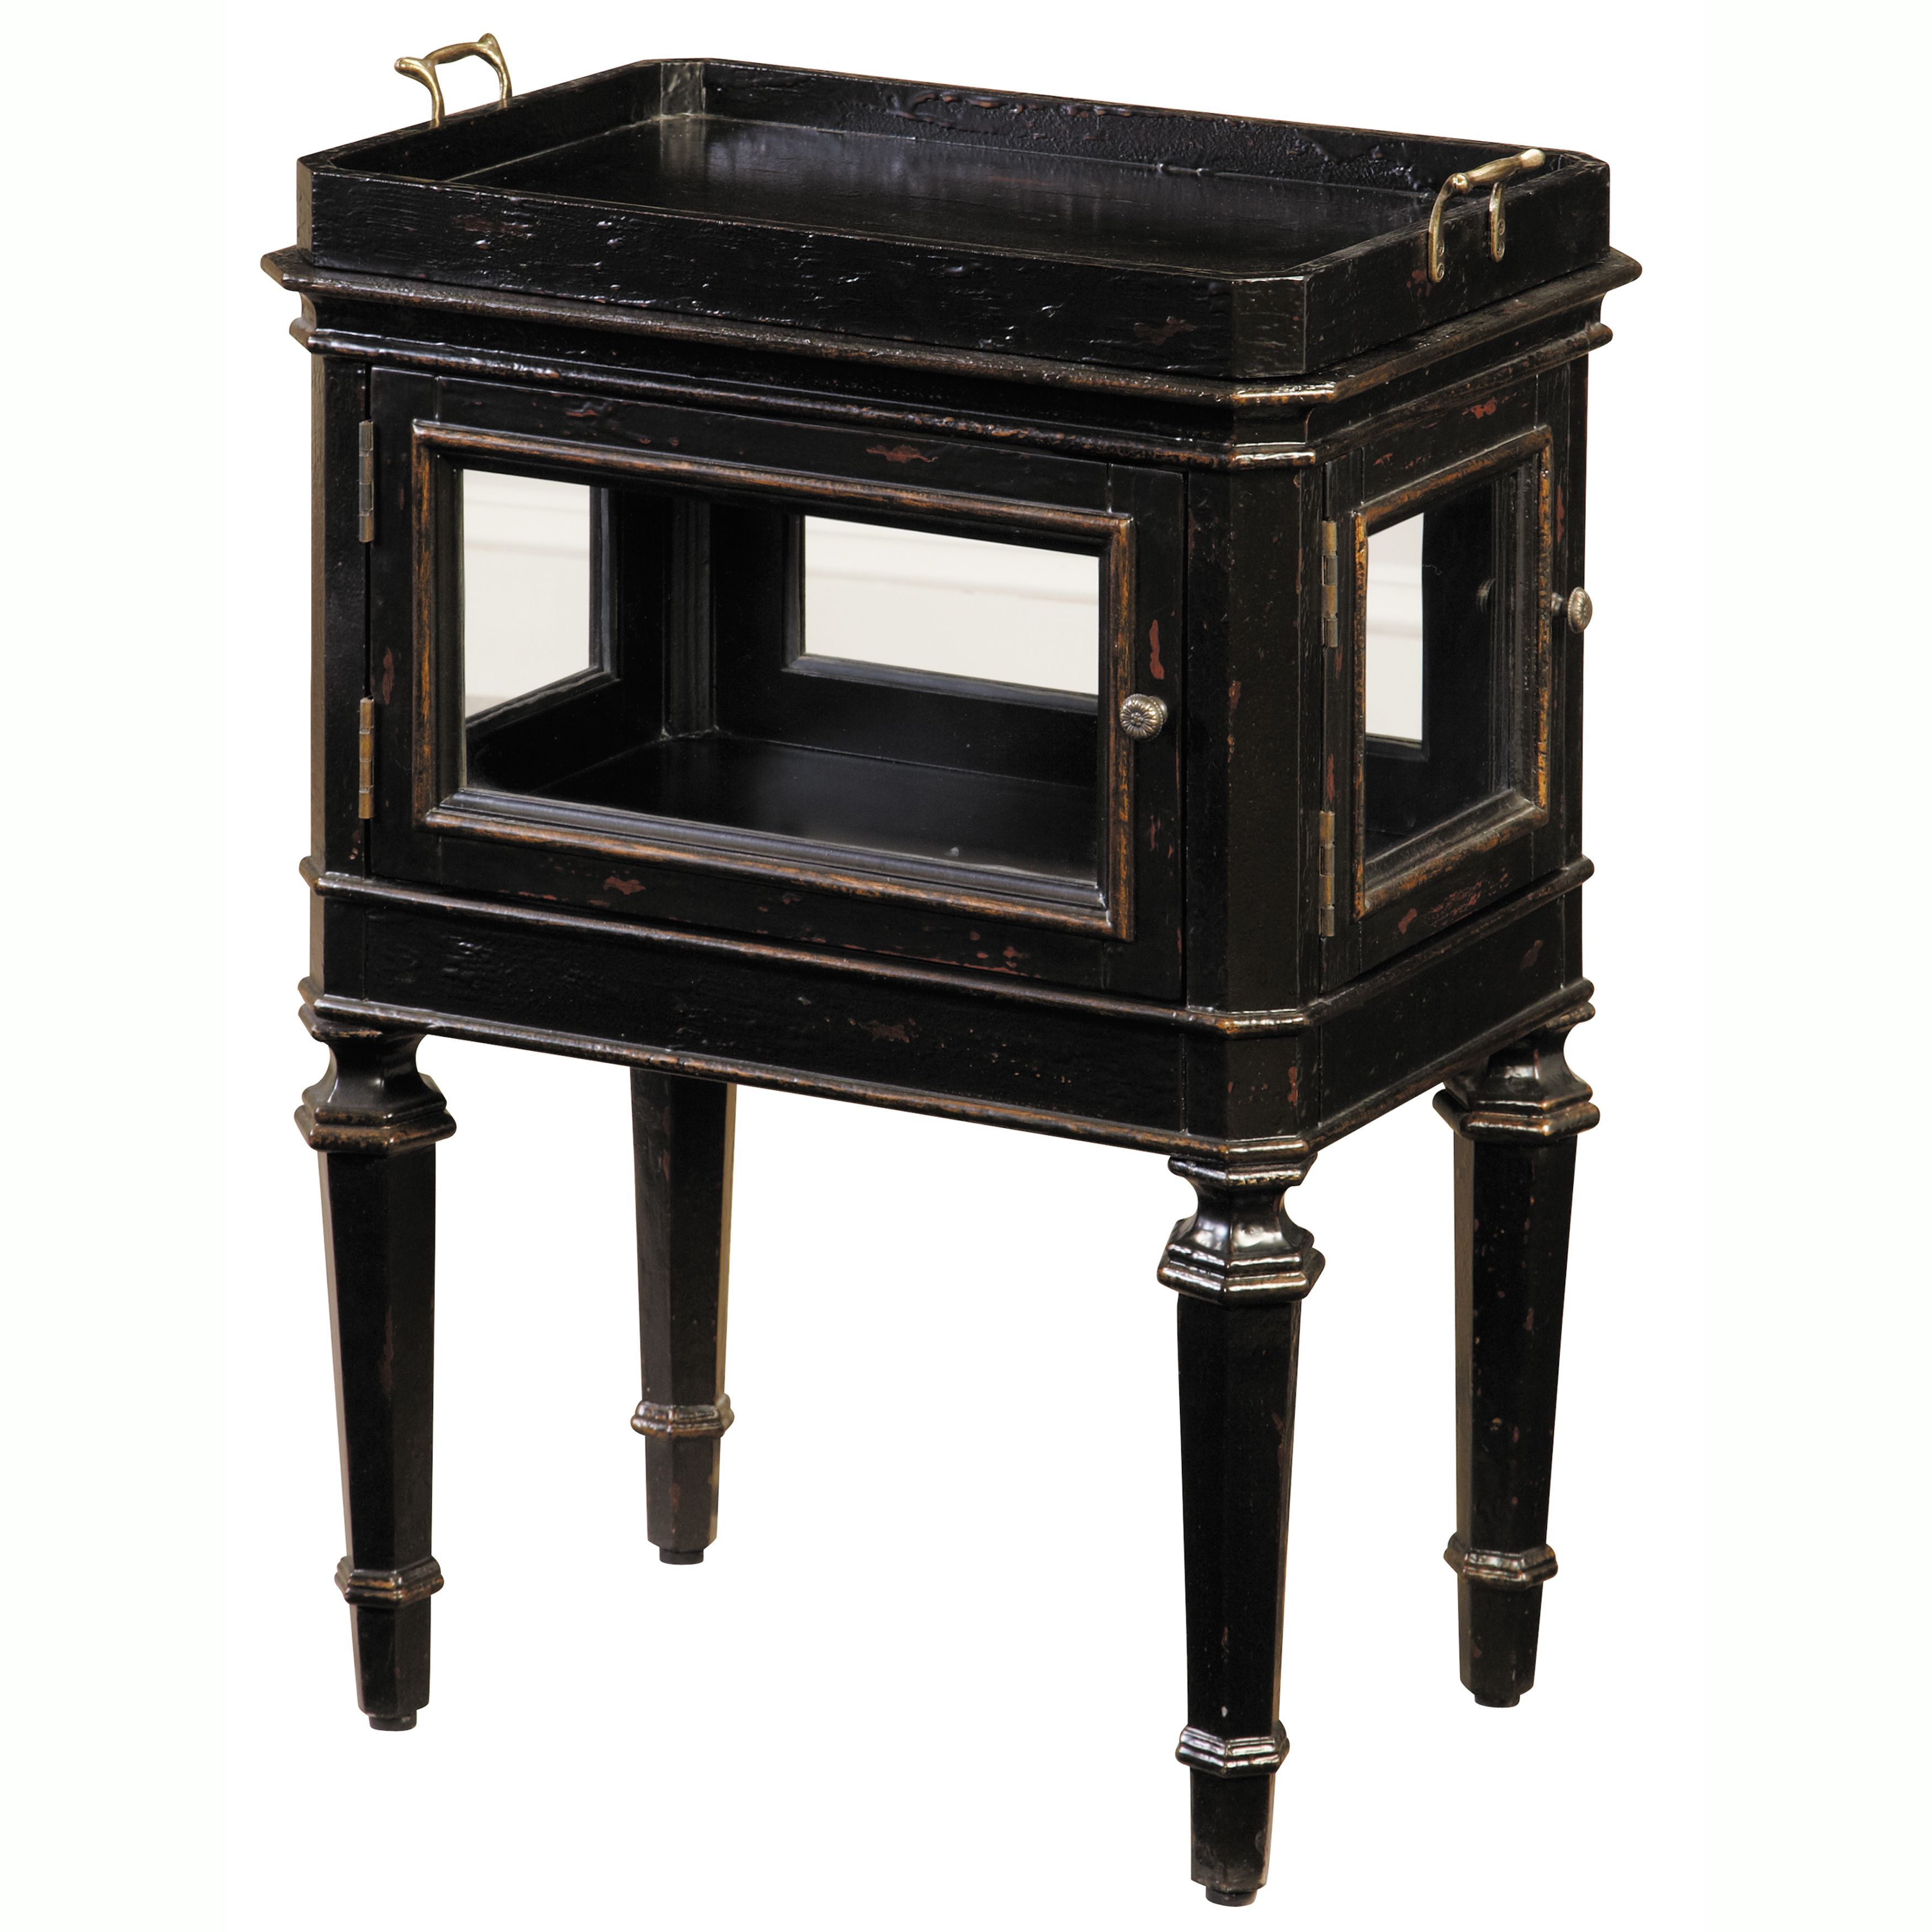 this hand painted distressed black finish accent table features two with glass doors functional and removable lift off try top the offers elegant leather chairs for living room